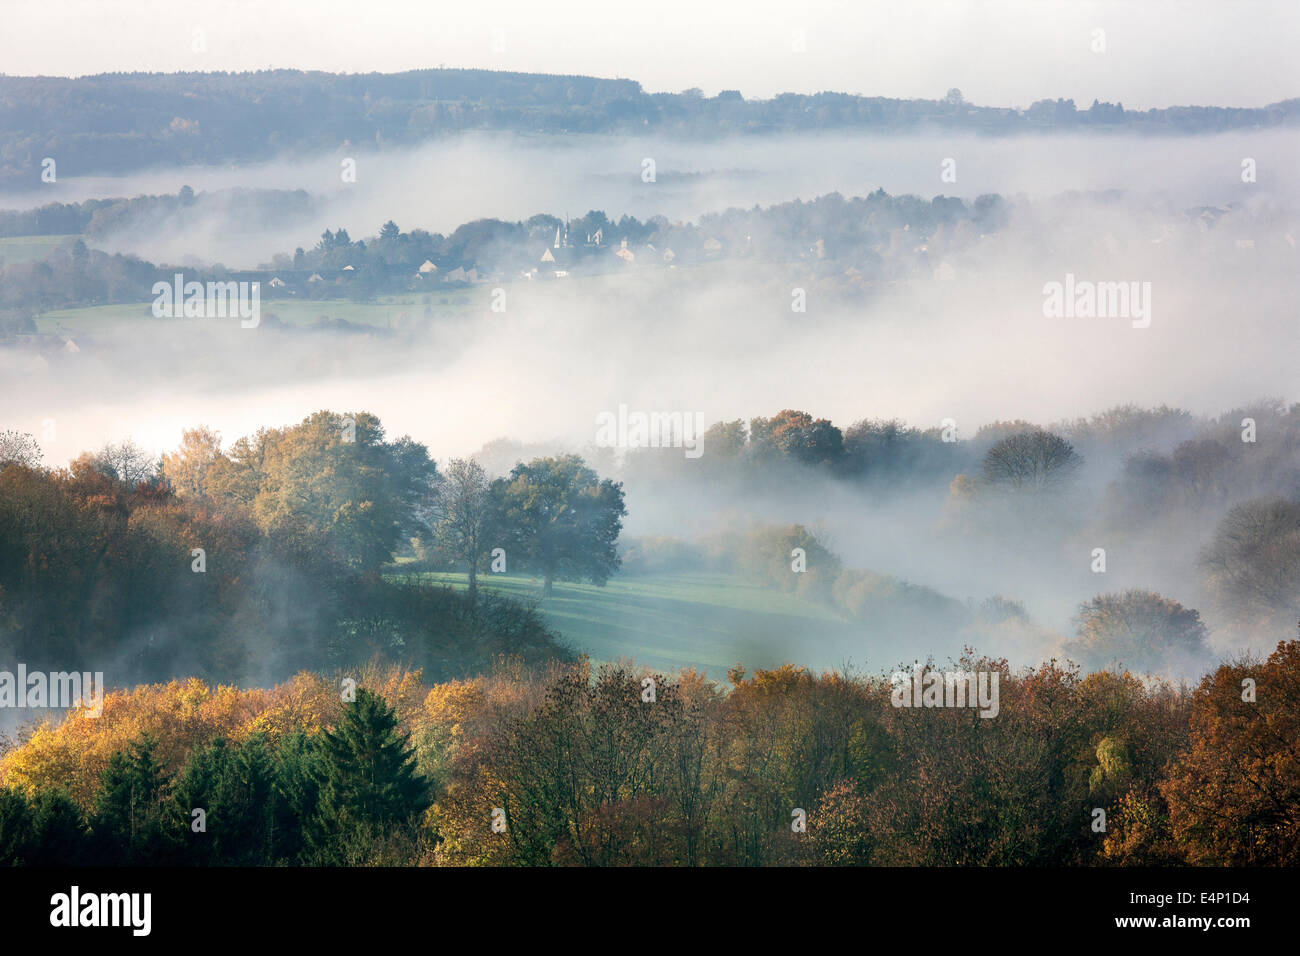 View over fields and the village Sougné-Remouchamps in the mist, Aywaille, Liège, Belgian Ardennes, Belgium Stock Photo